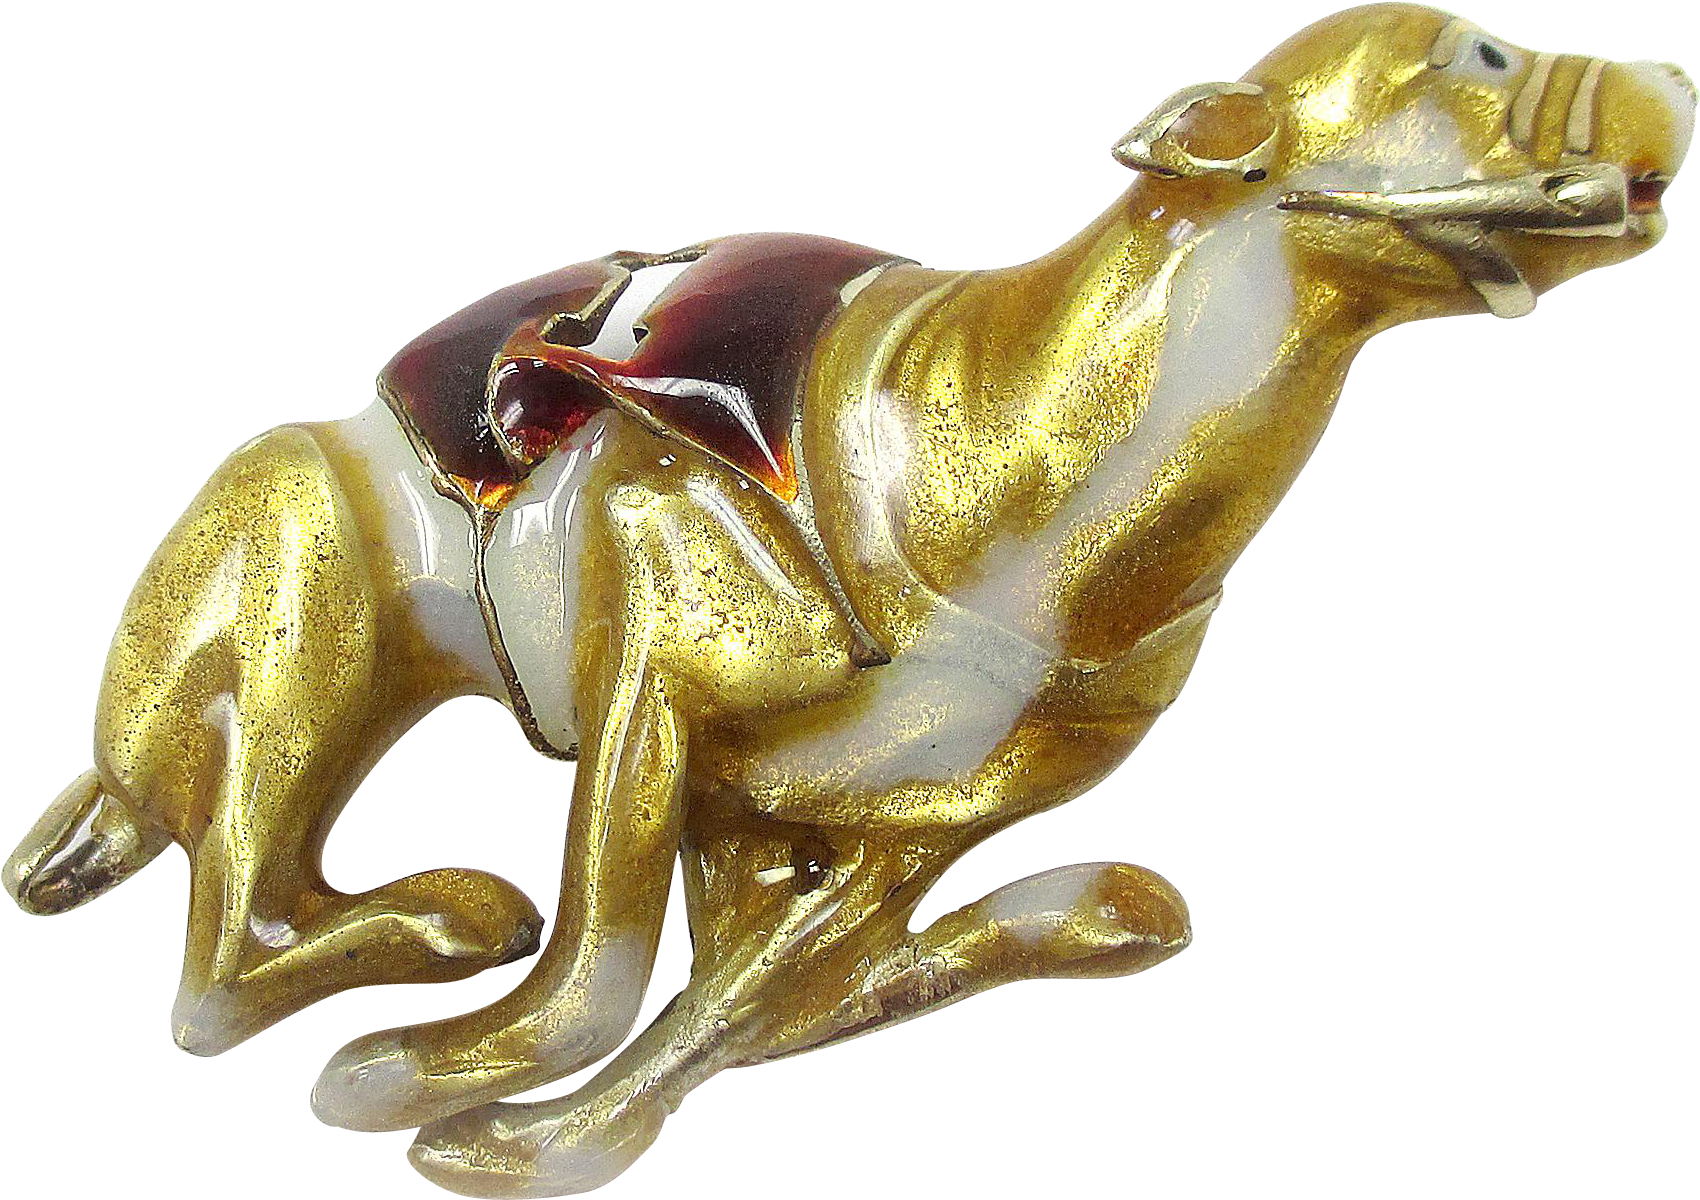 A Gold And White Camel Statue